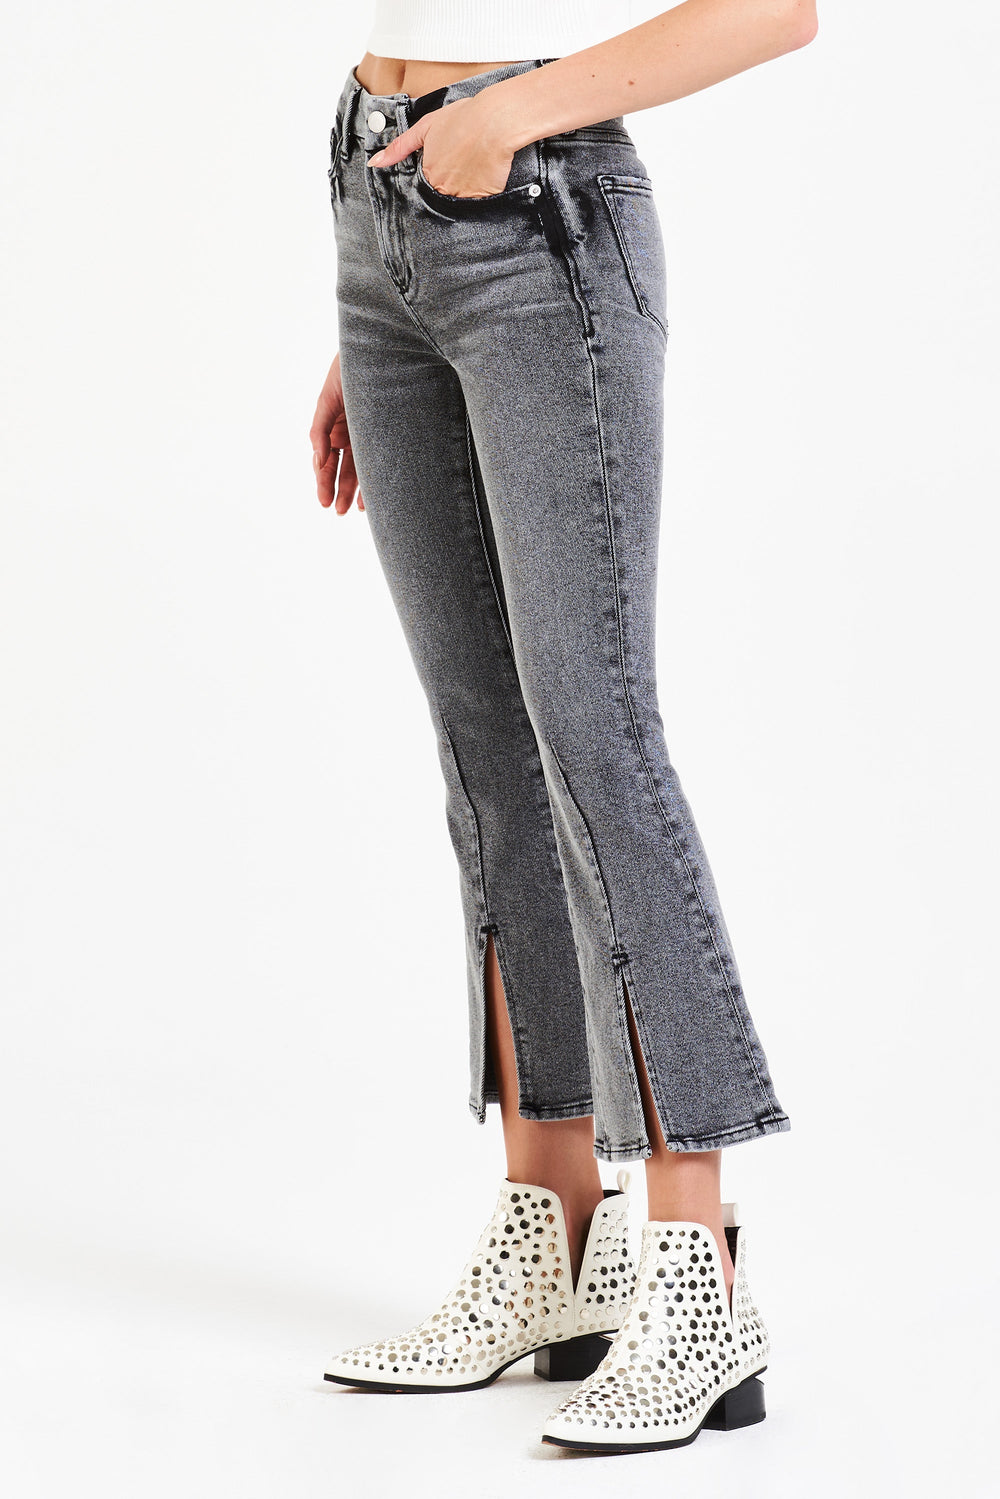 image of a female model wearing a JEANNE SUPER HIGH RISE CROPPED FLARE LEG JEANS STANFORD JEANS